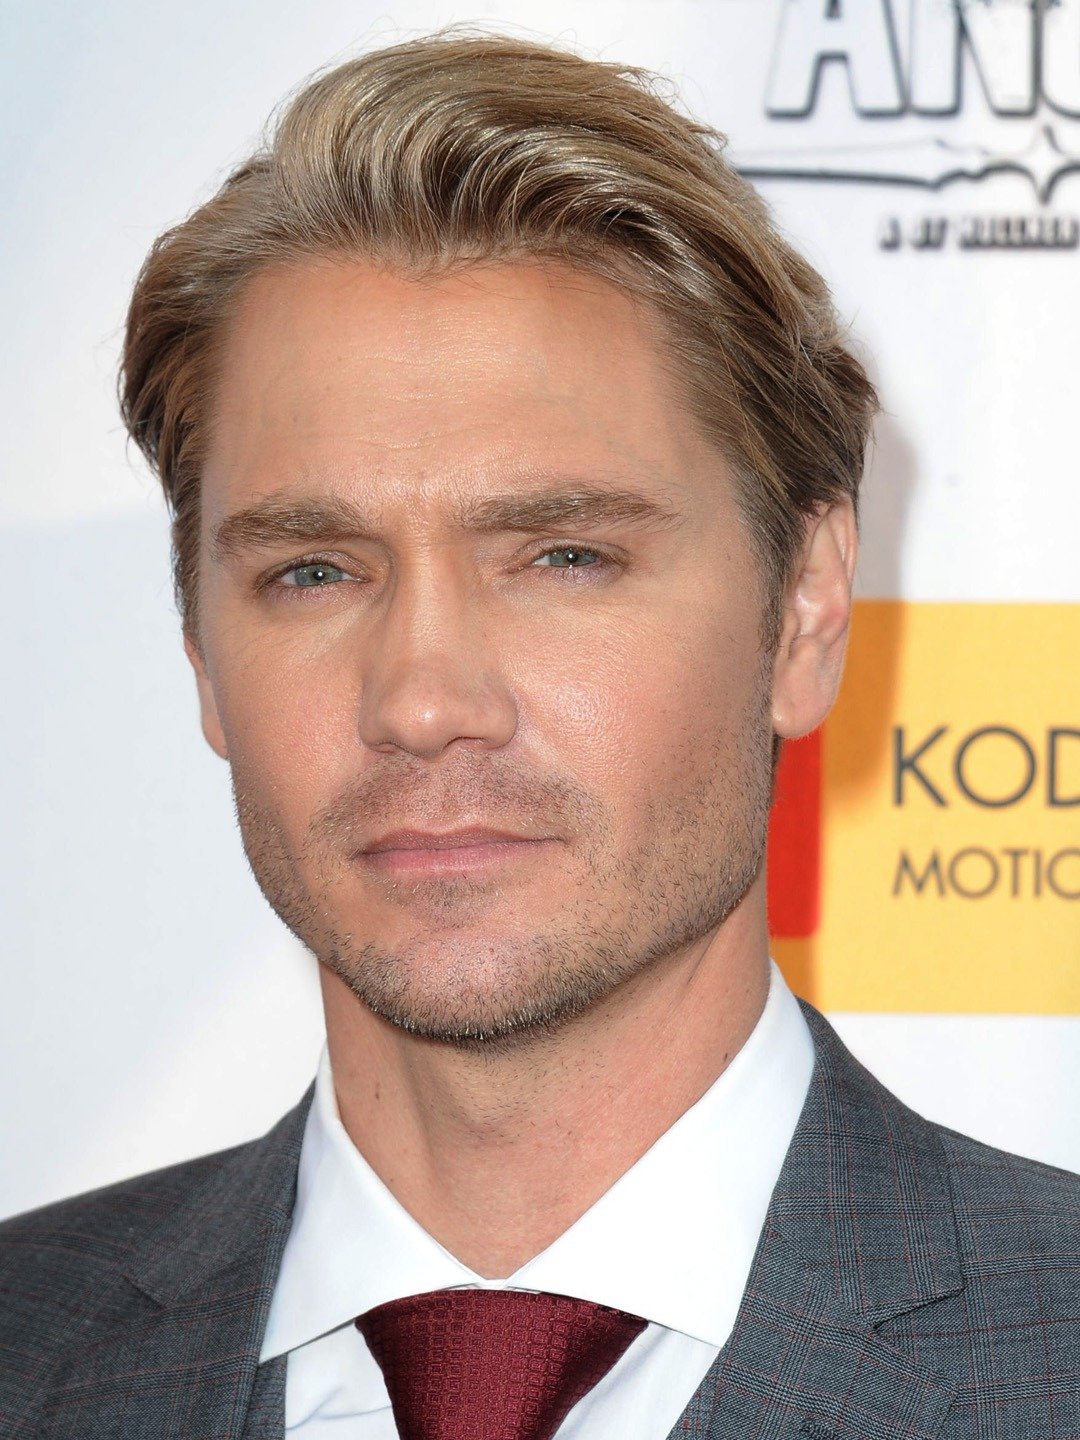 How tall is Chad Michael Murray?